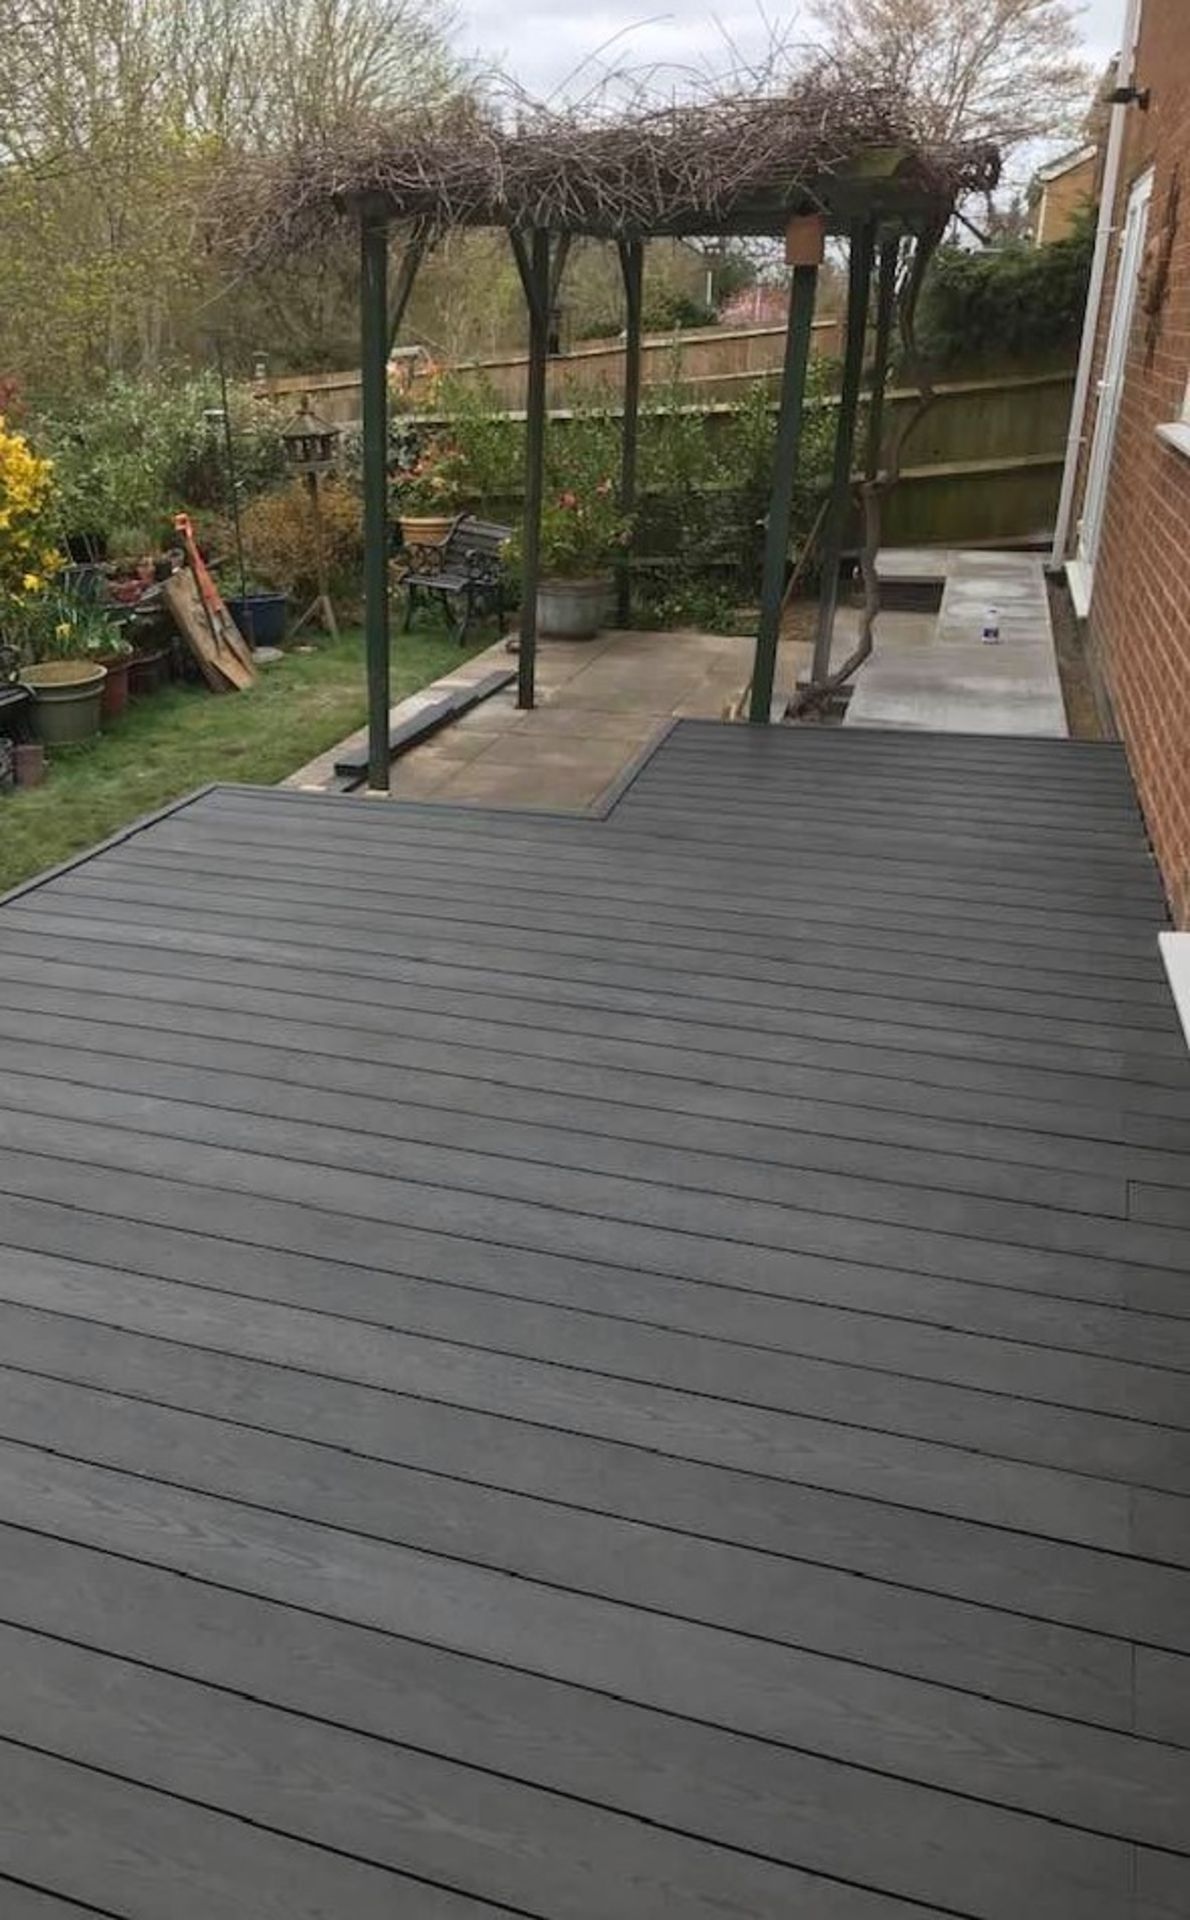 * 20 WPC Composite Dark Grey Double sided Embossed Woodgrain Decking Boards 2900mm x 146mm x 25mm